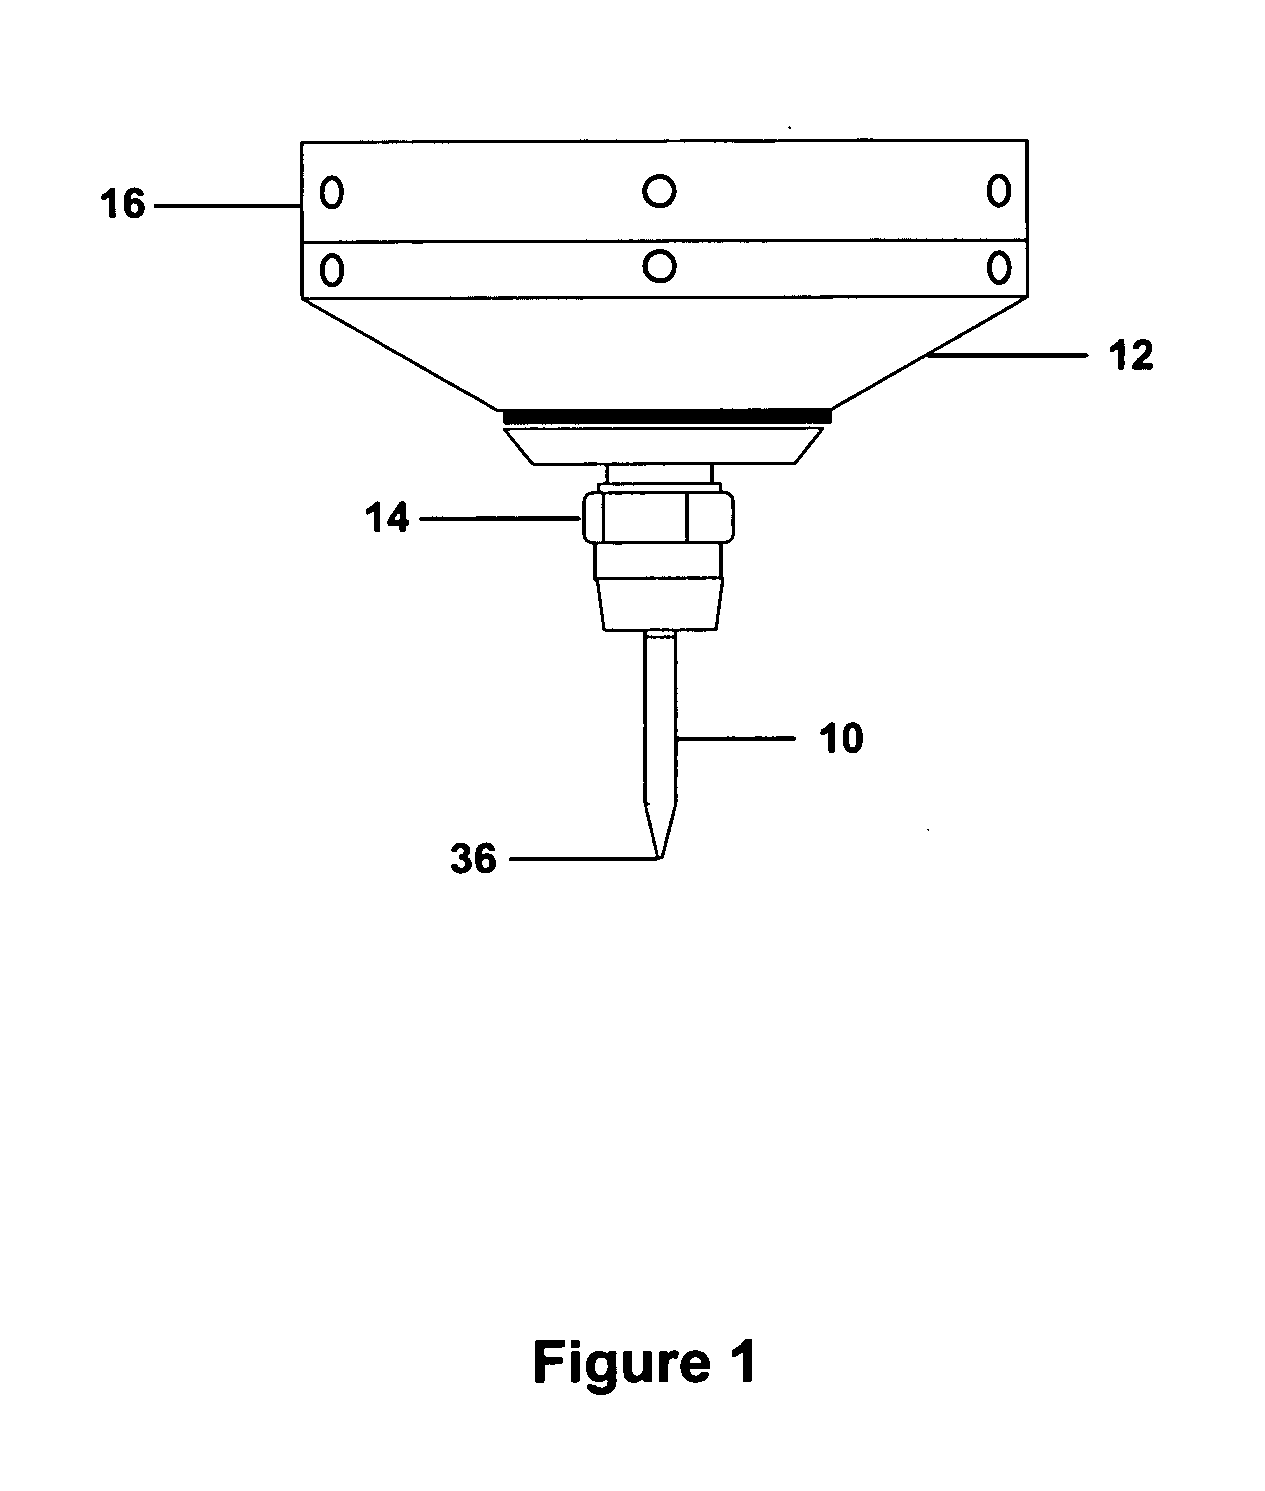 Annular aerosol jet deposition using an extended nozzle